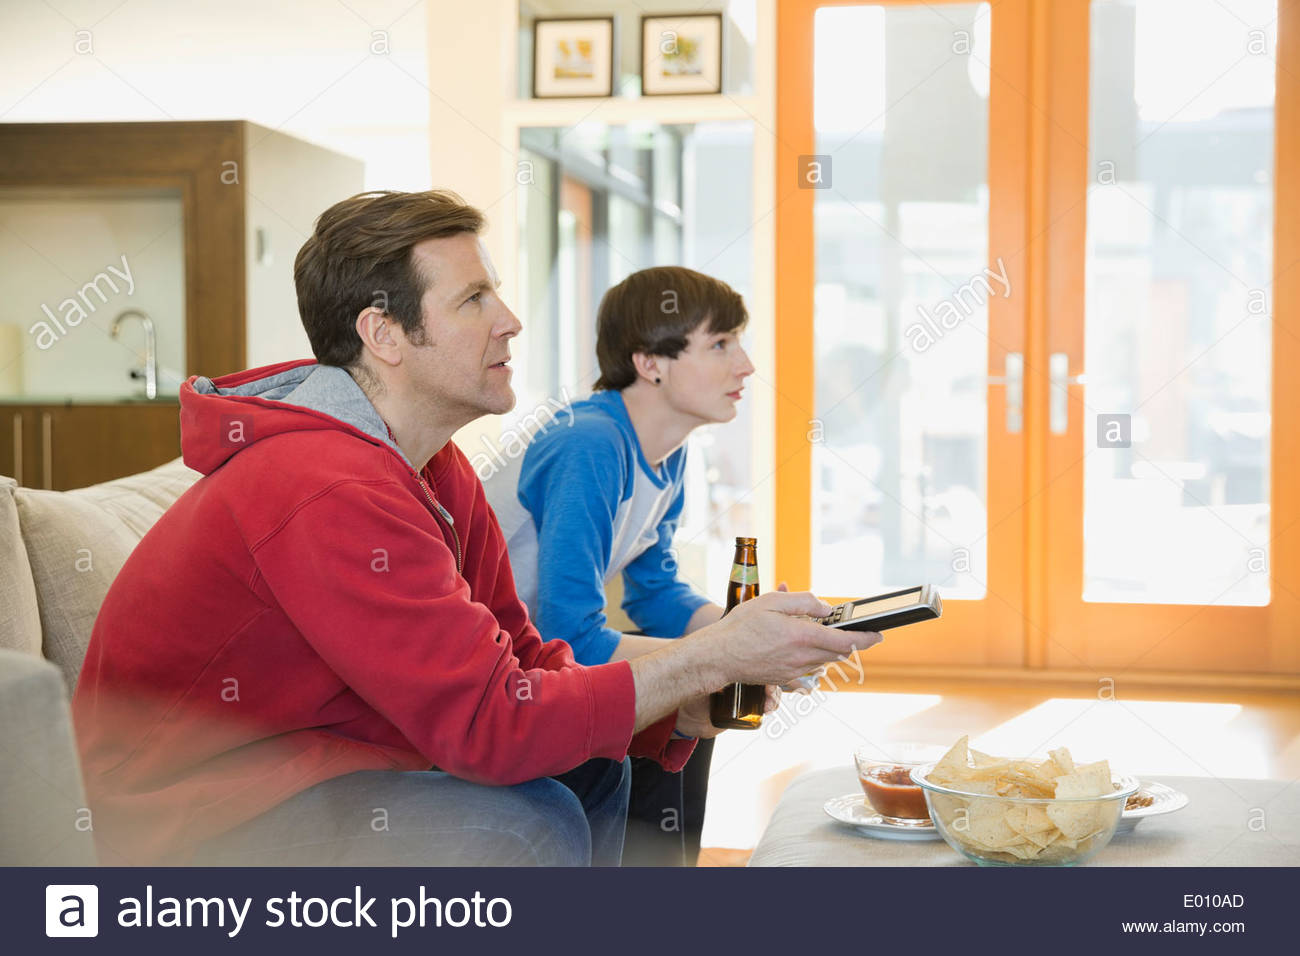 Father and son watching TV in living room Stock Photo